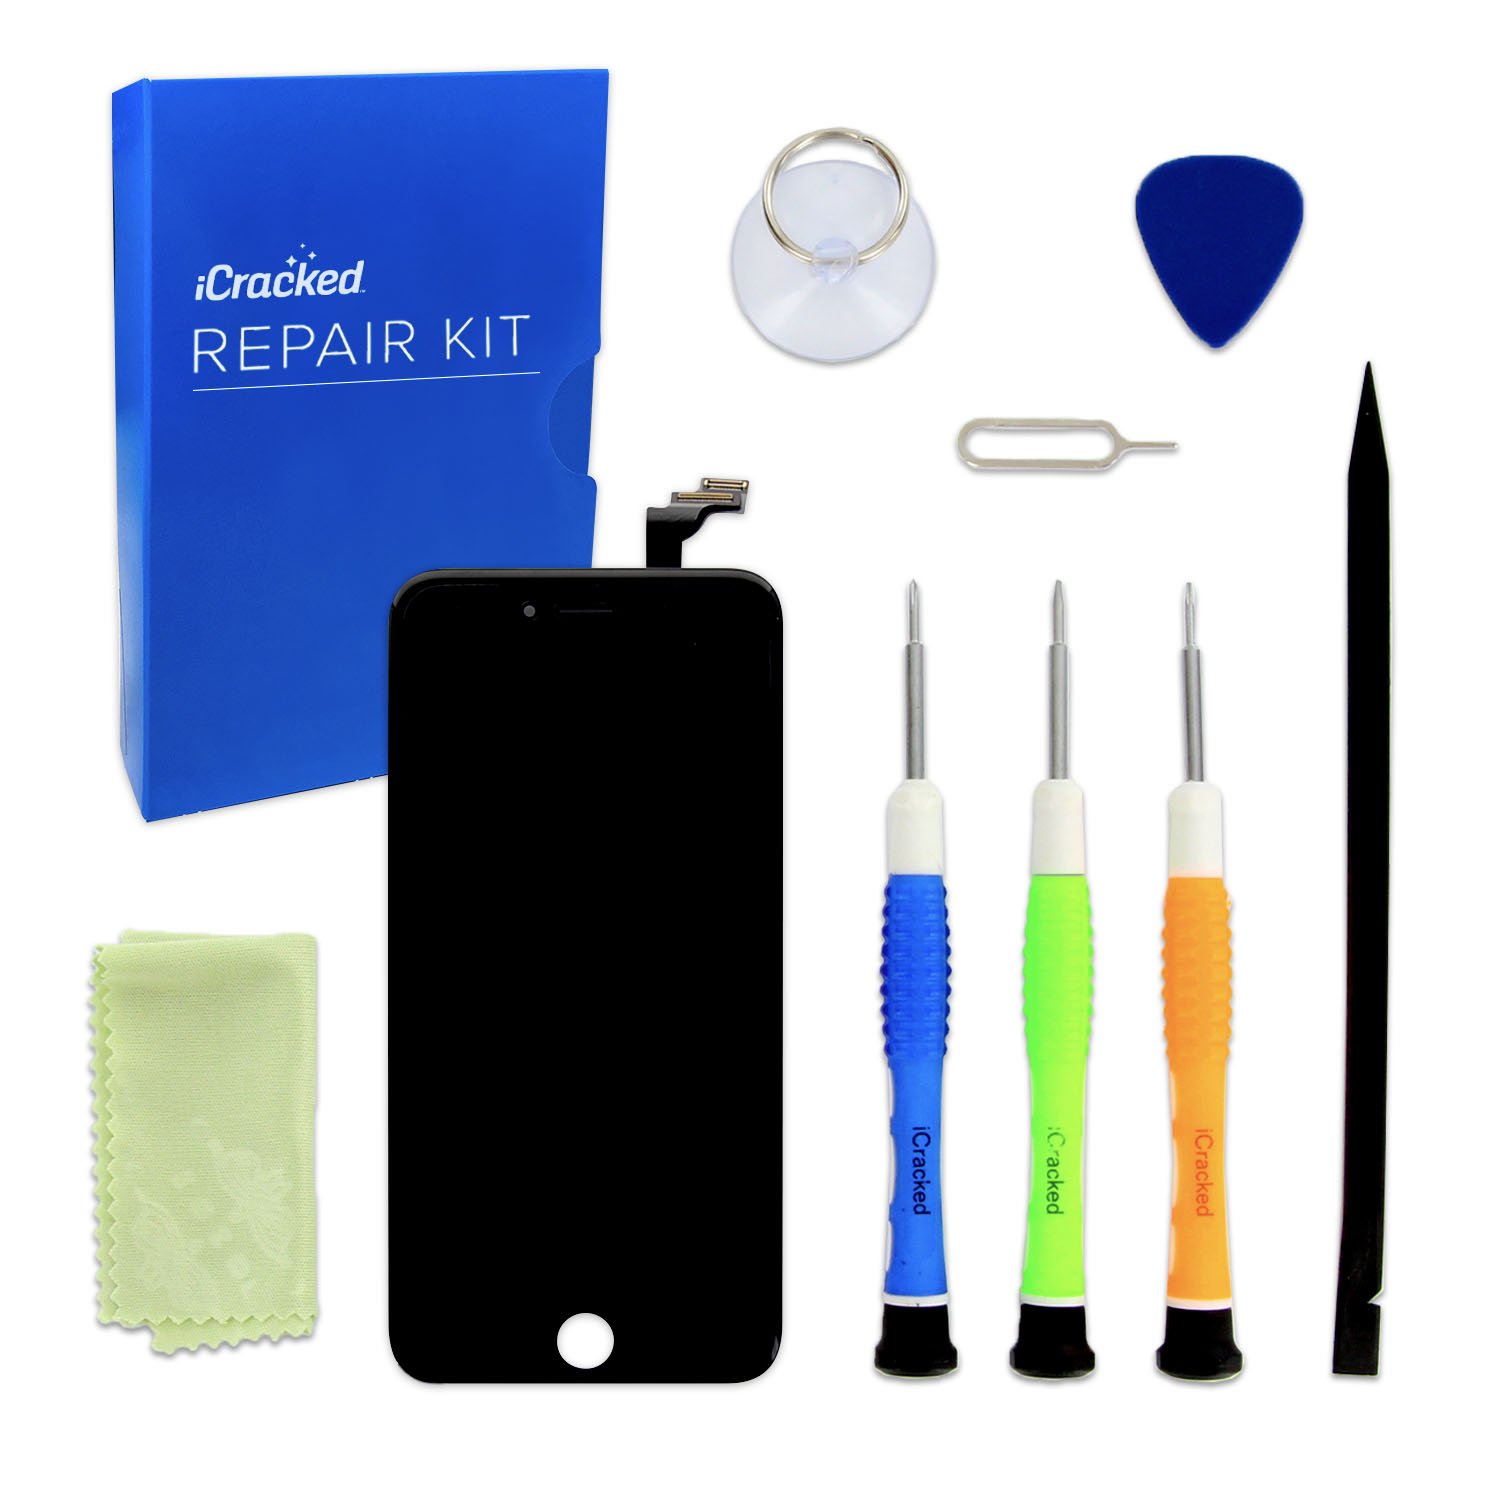 Iphone 6s screen replacement kit amazon